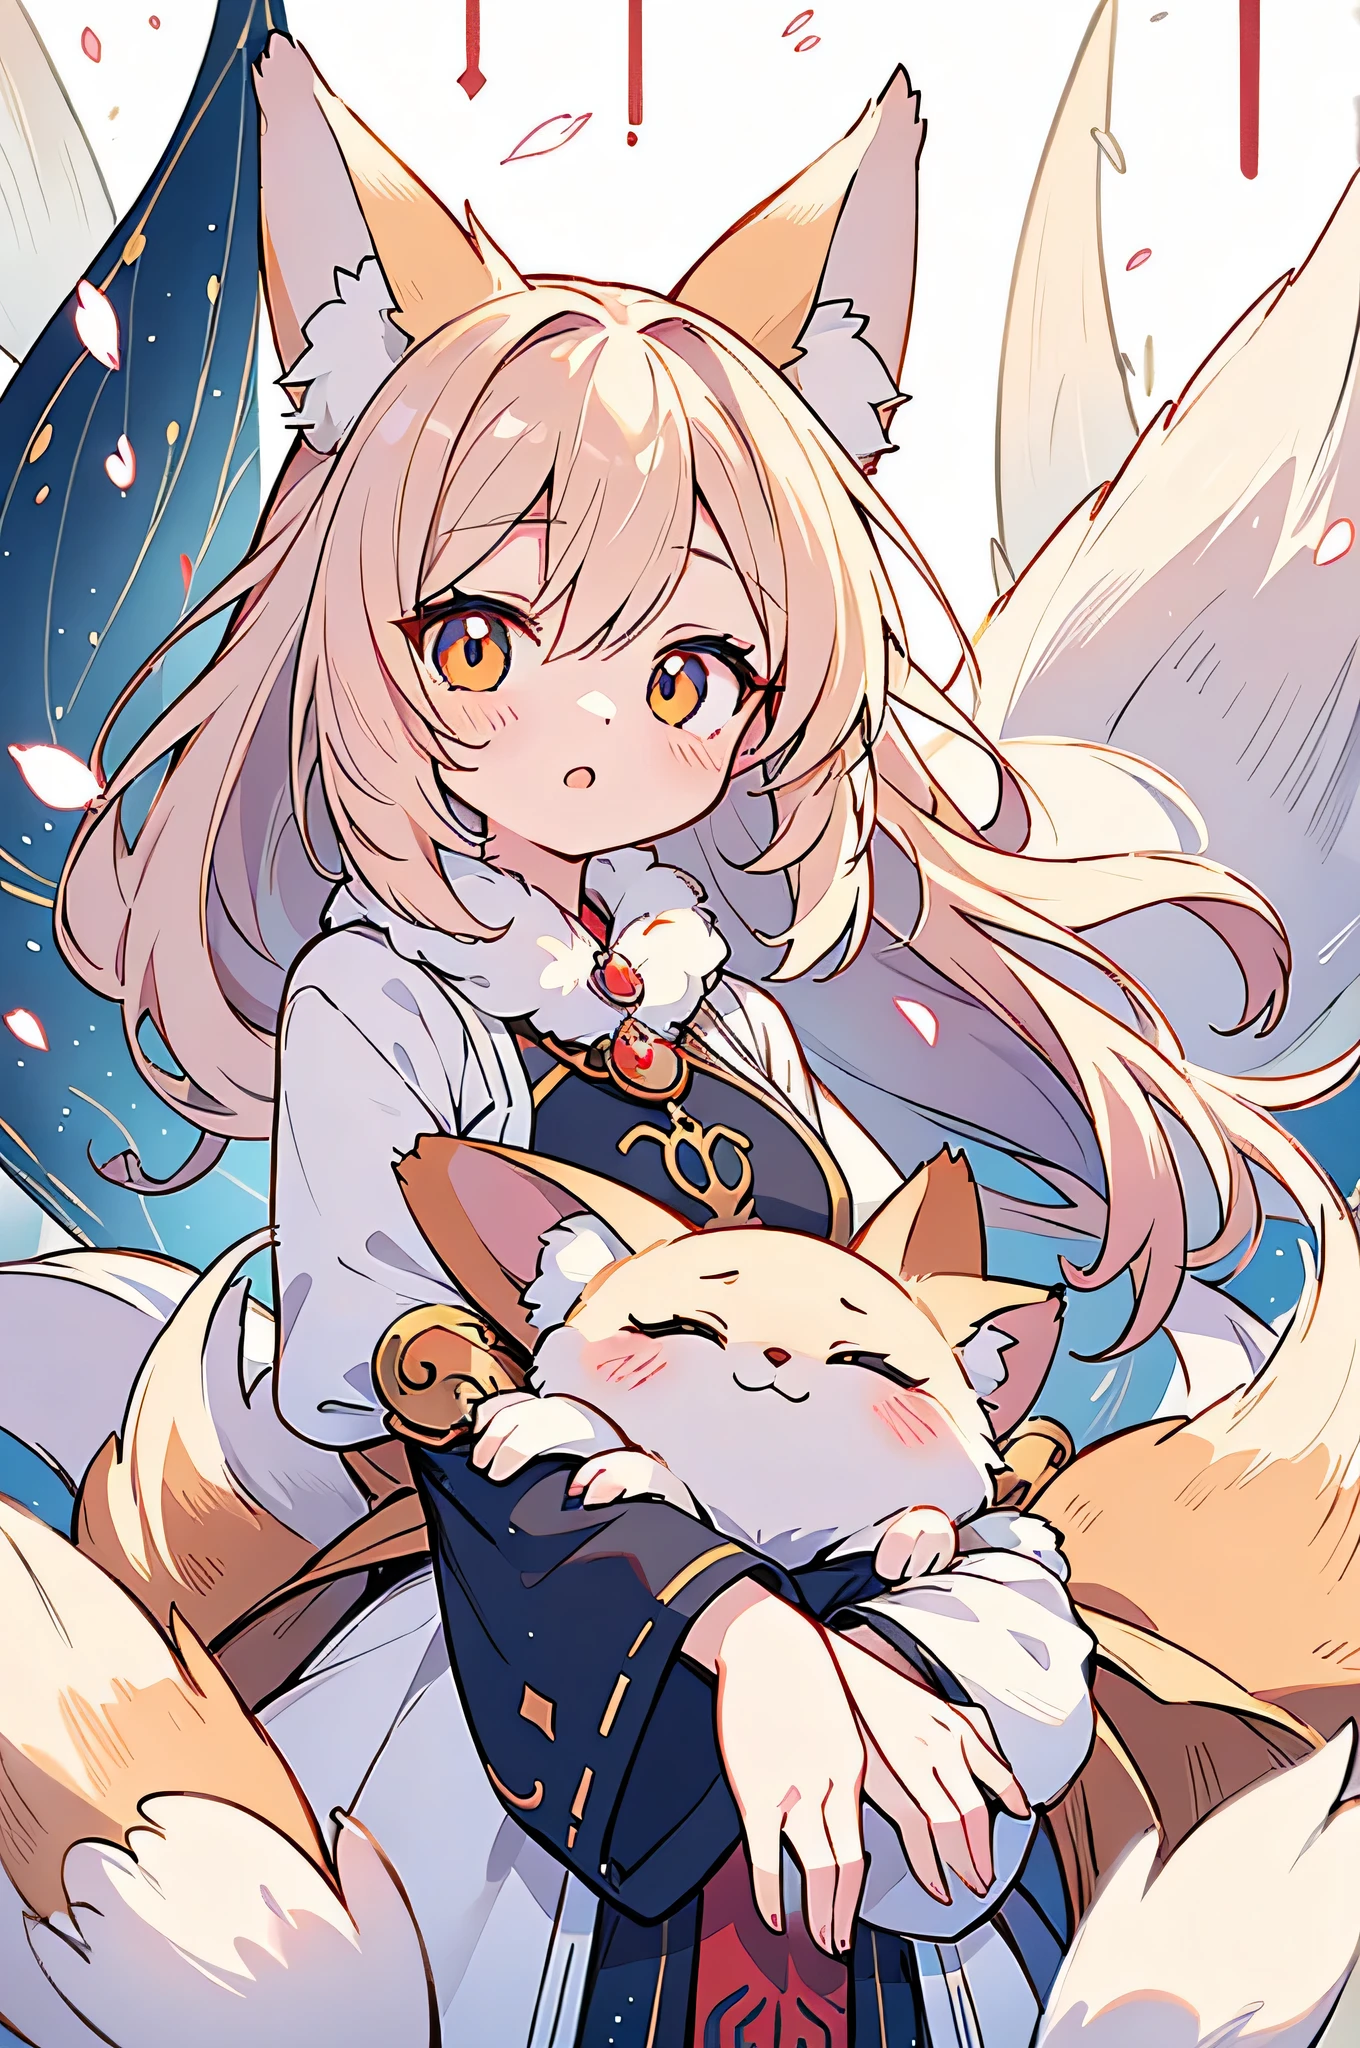 Title: "Enchanting Fox Spirit"

Description:
Create an AI-generated artwork featuring a charming and cute fox girl with an enchanting expression. Imagine a mischievous yet endearing character, blending human and fox features seamlessly. Focus on conveying emotion through her eyes and facial expression. Experiment with a balance of innocence and playfulness, capturing the essence of a magical fox spirit. Feel free to incorporate elements like furry ears, a hint of whiskers, and perhaps a subtle touch of ethereal glow around her. Explore various color palettes to enhance the enchanting atmosphere. Be creative and have fun bringing this delightful fox girl to life!